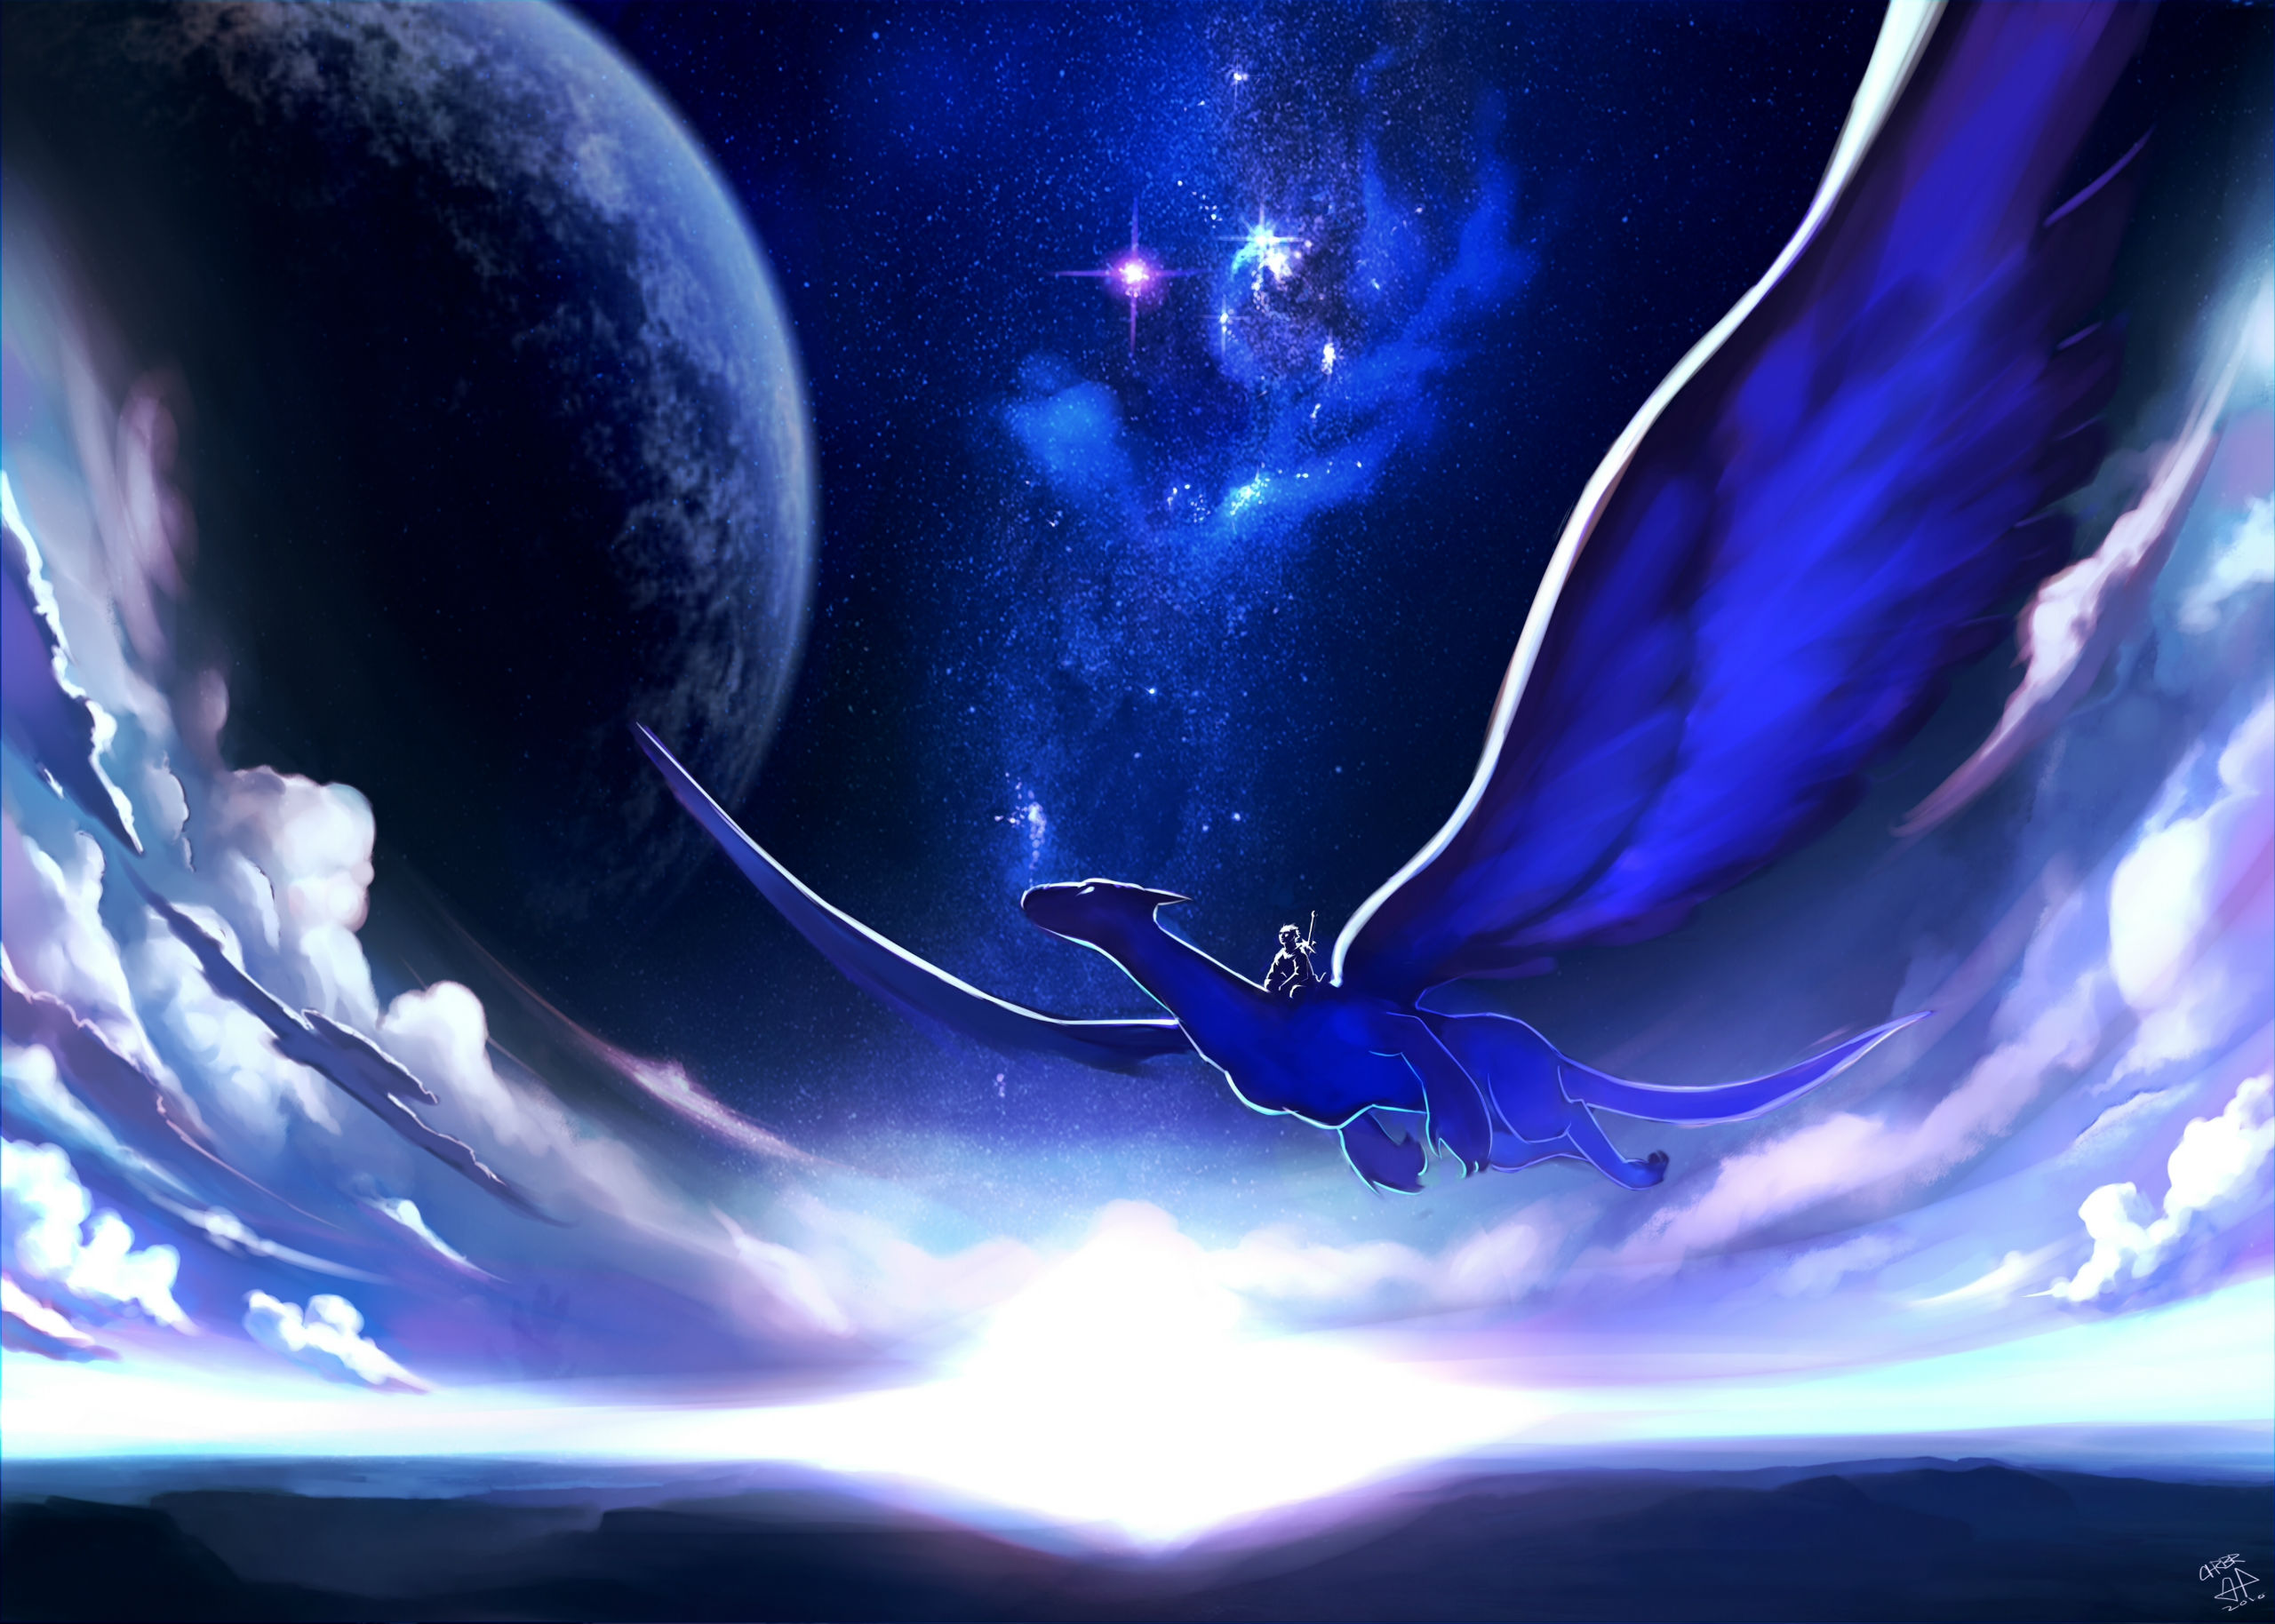 dragons, Sky, Planets, Clouds, Wings, Flight, Fantasy Wallpaper